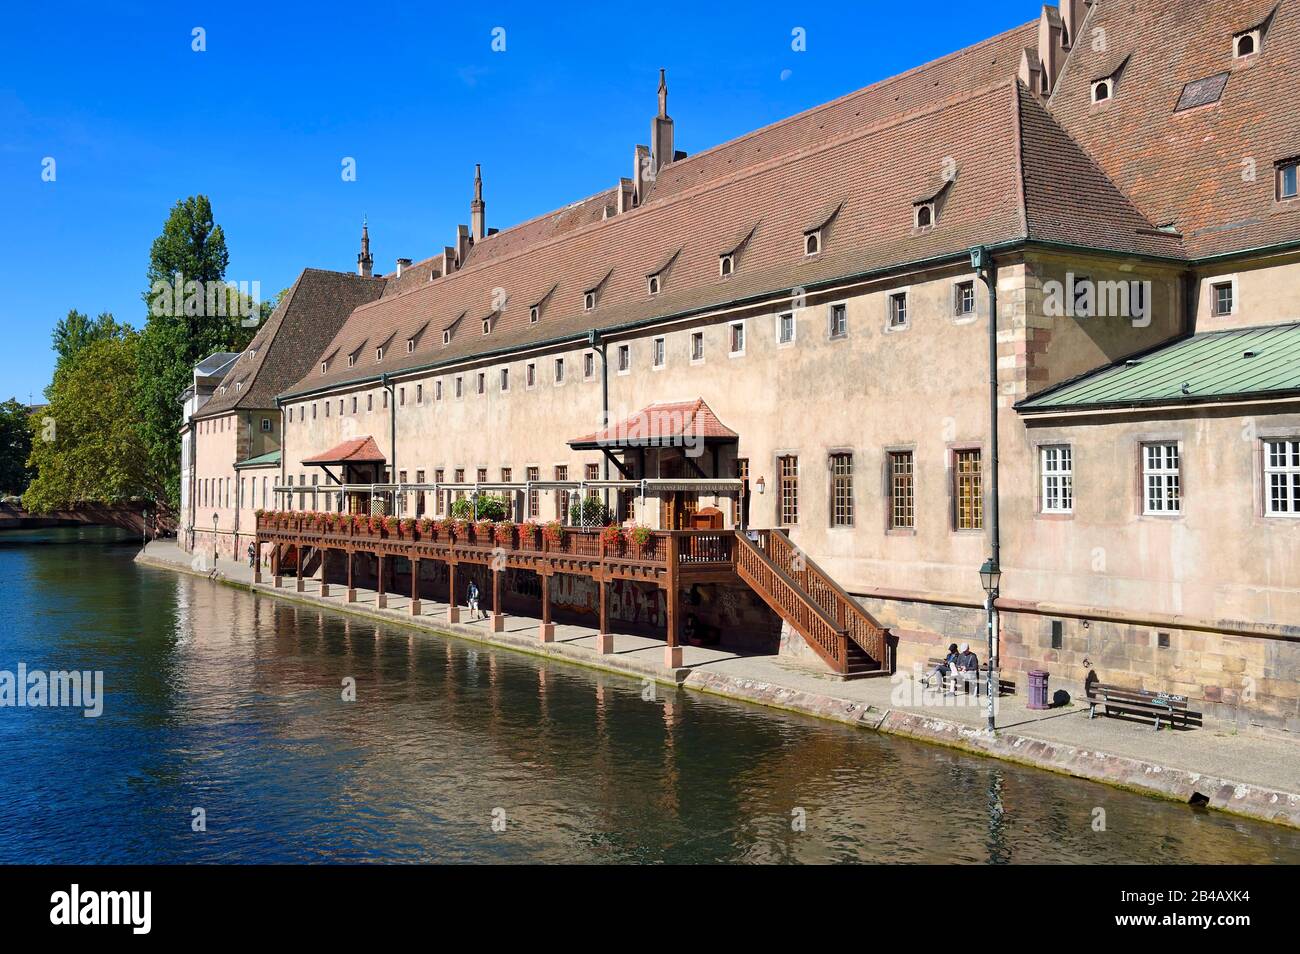 France, Bas Rhin, Strasbourg, old town listed as World Heritage by UNESCO, banks of Ill River, the Ancienne Douane (Old Customs house) Stock Photo